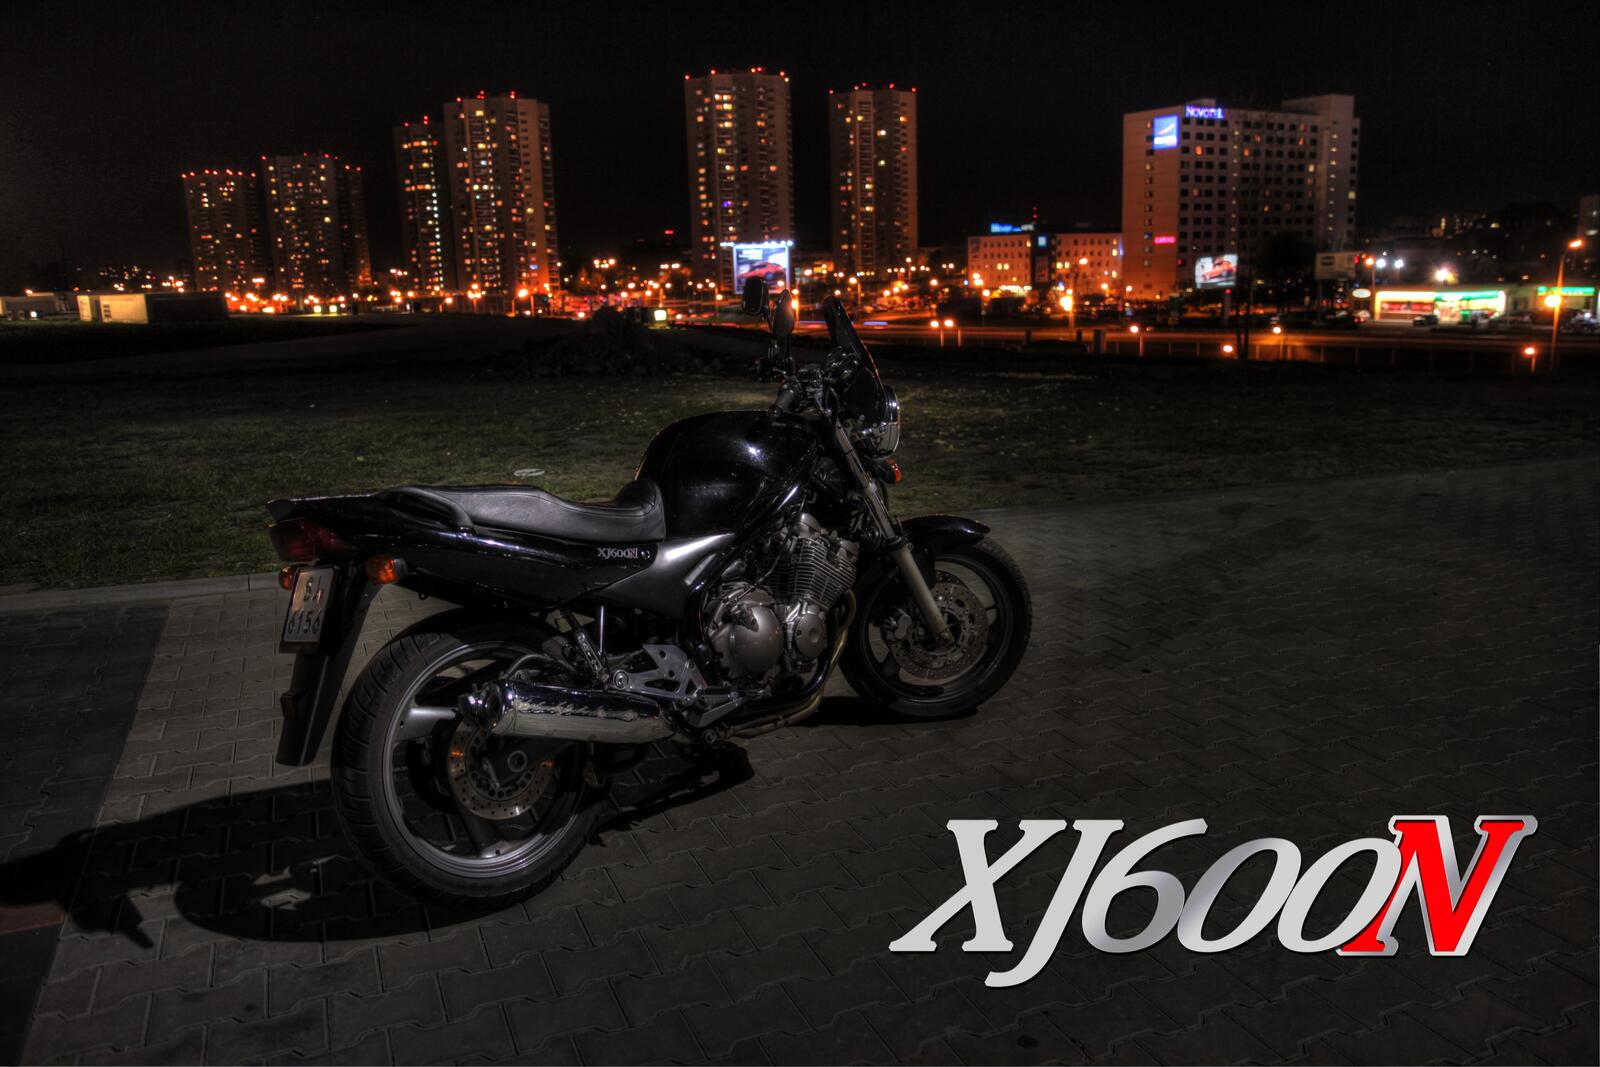 Wallpapers night motorcycle Poland on the desktop